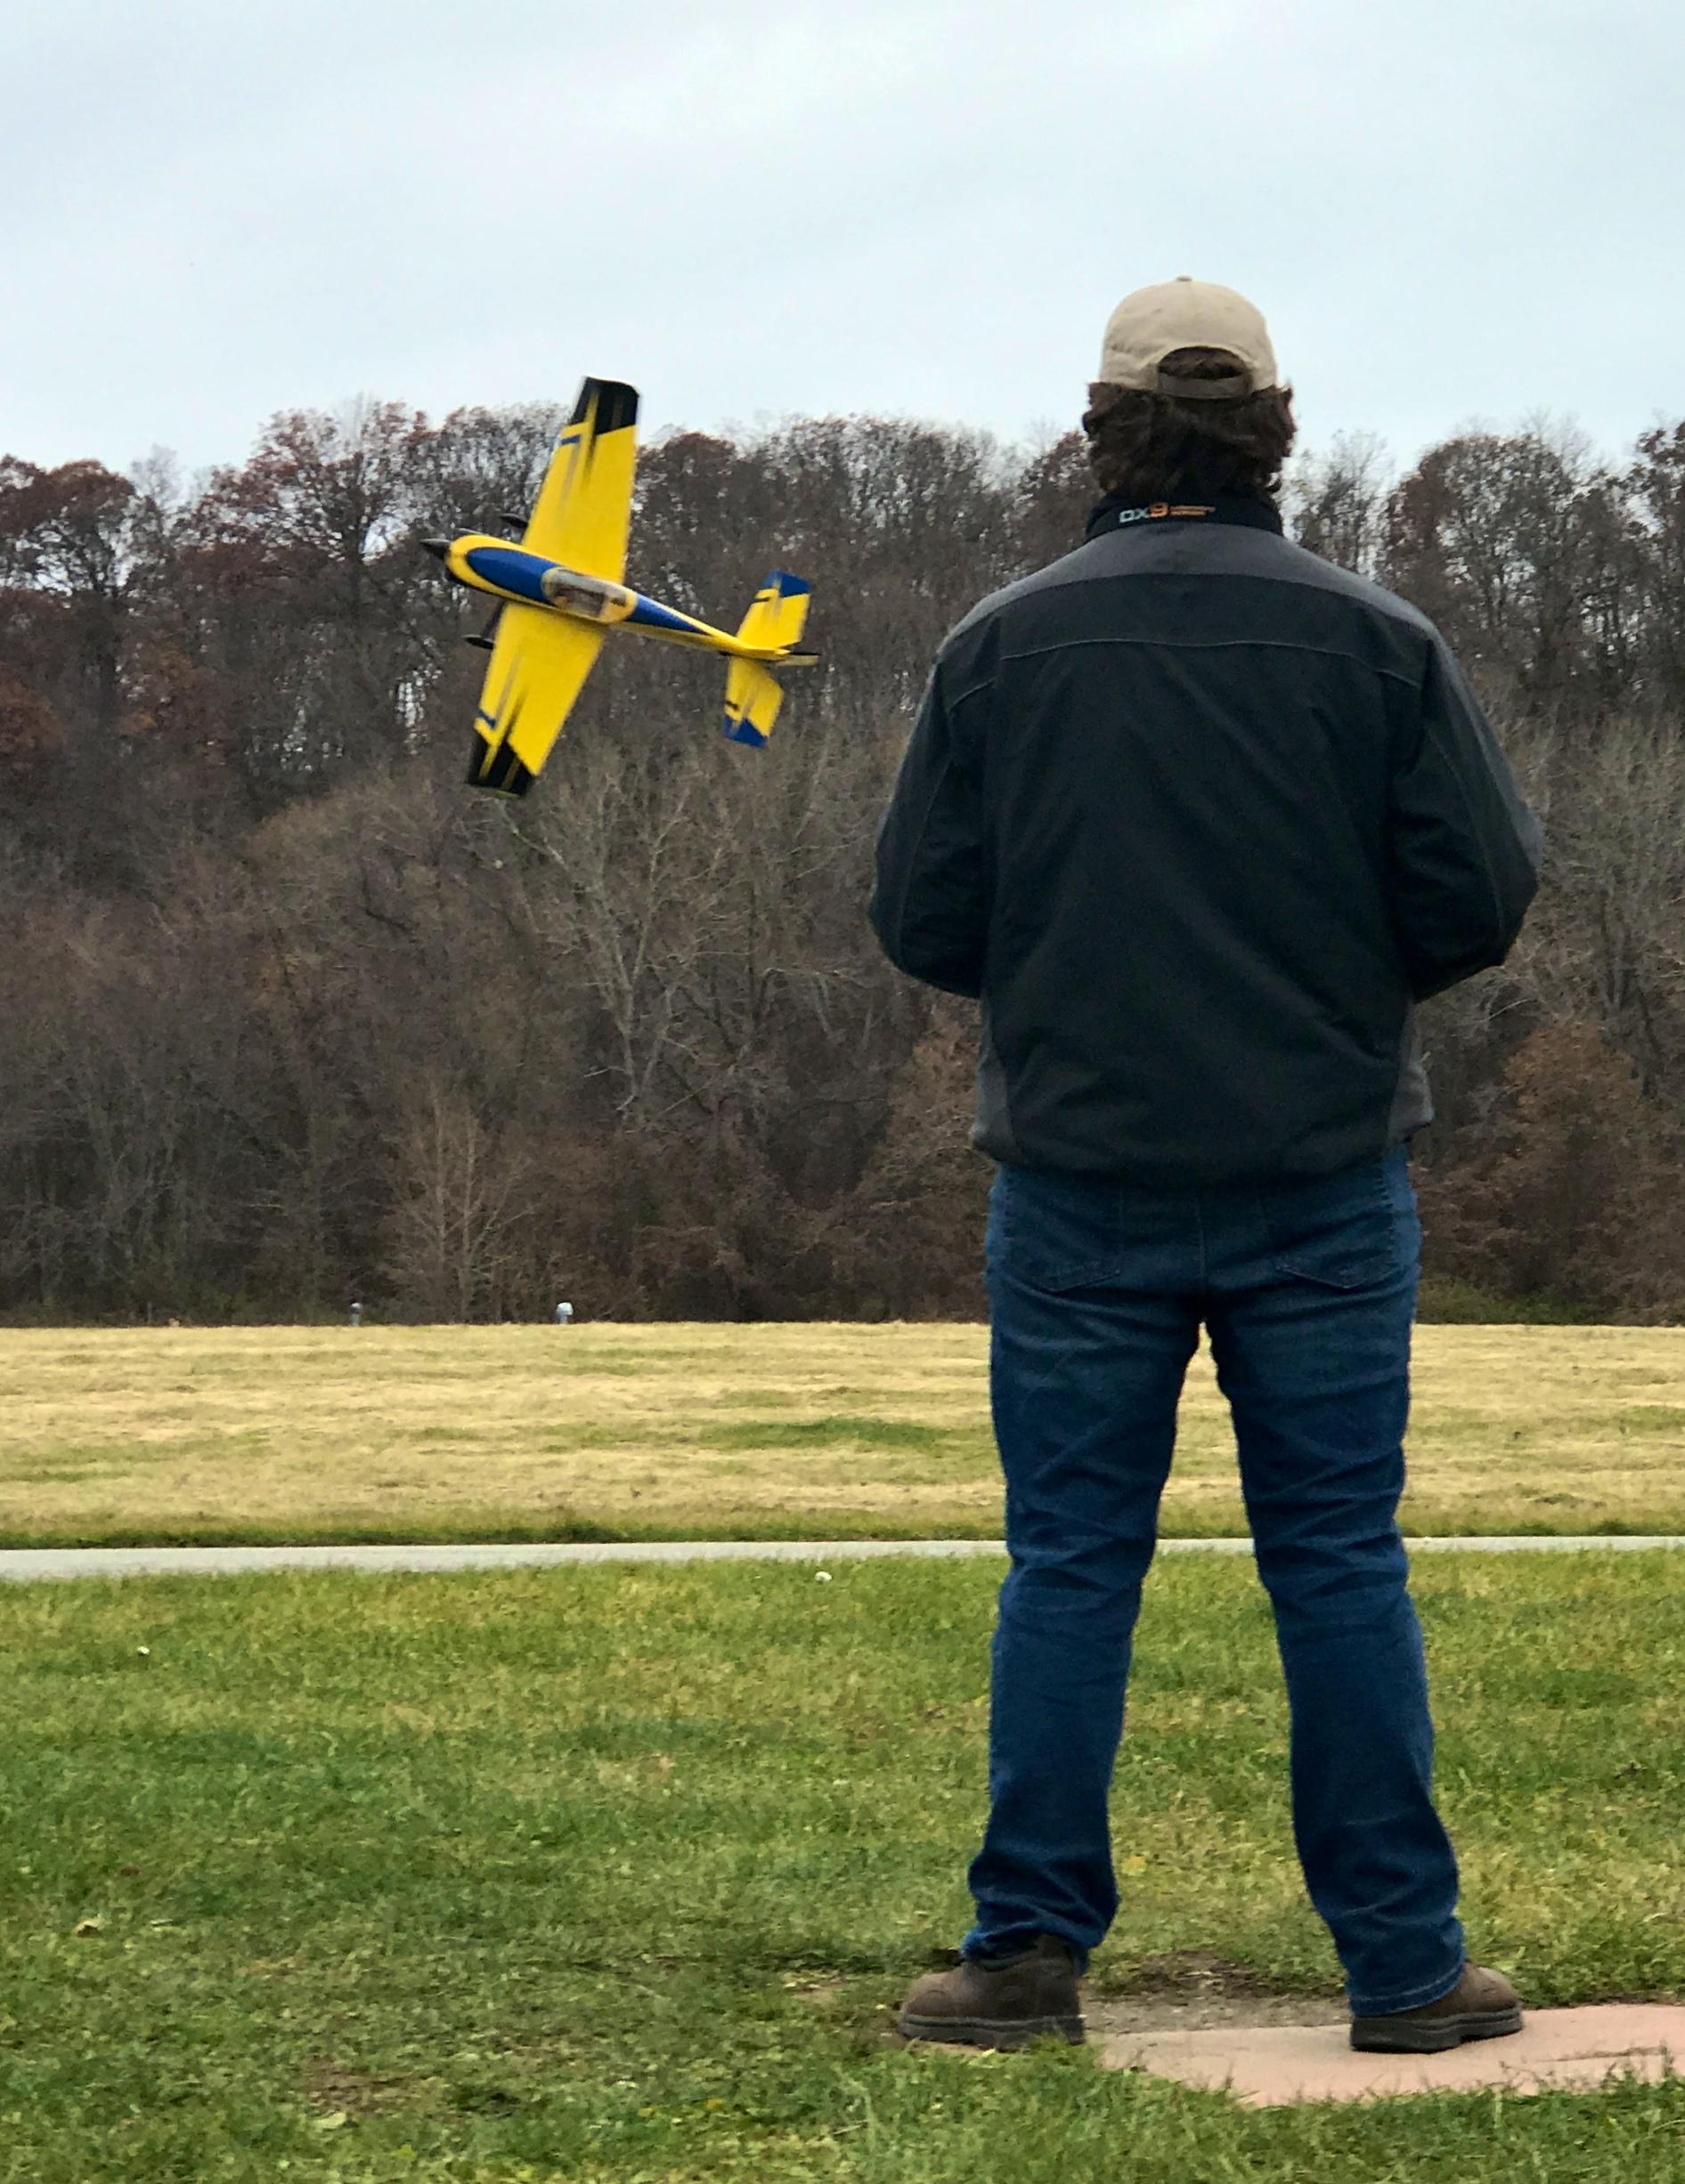 Rc Planes 101: Factors to Consider When Purchasing an RC Plane